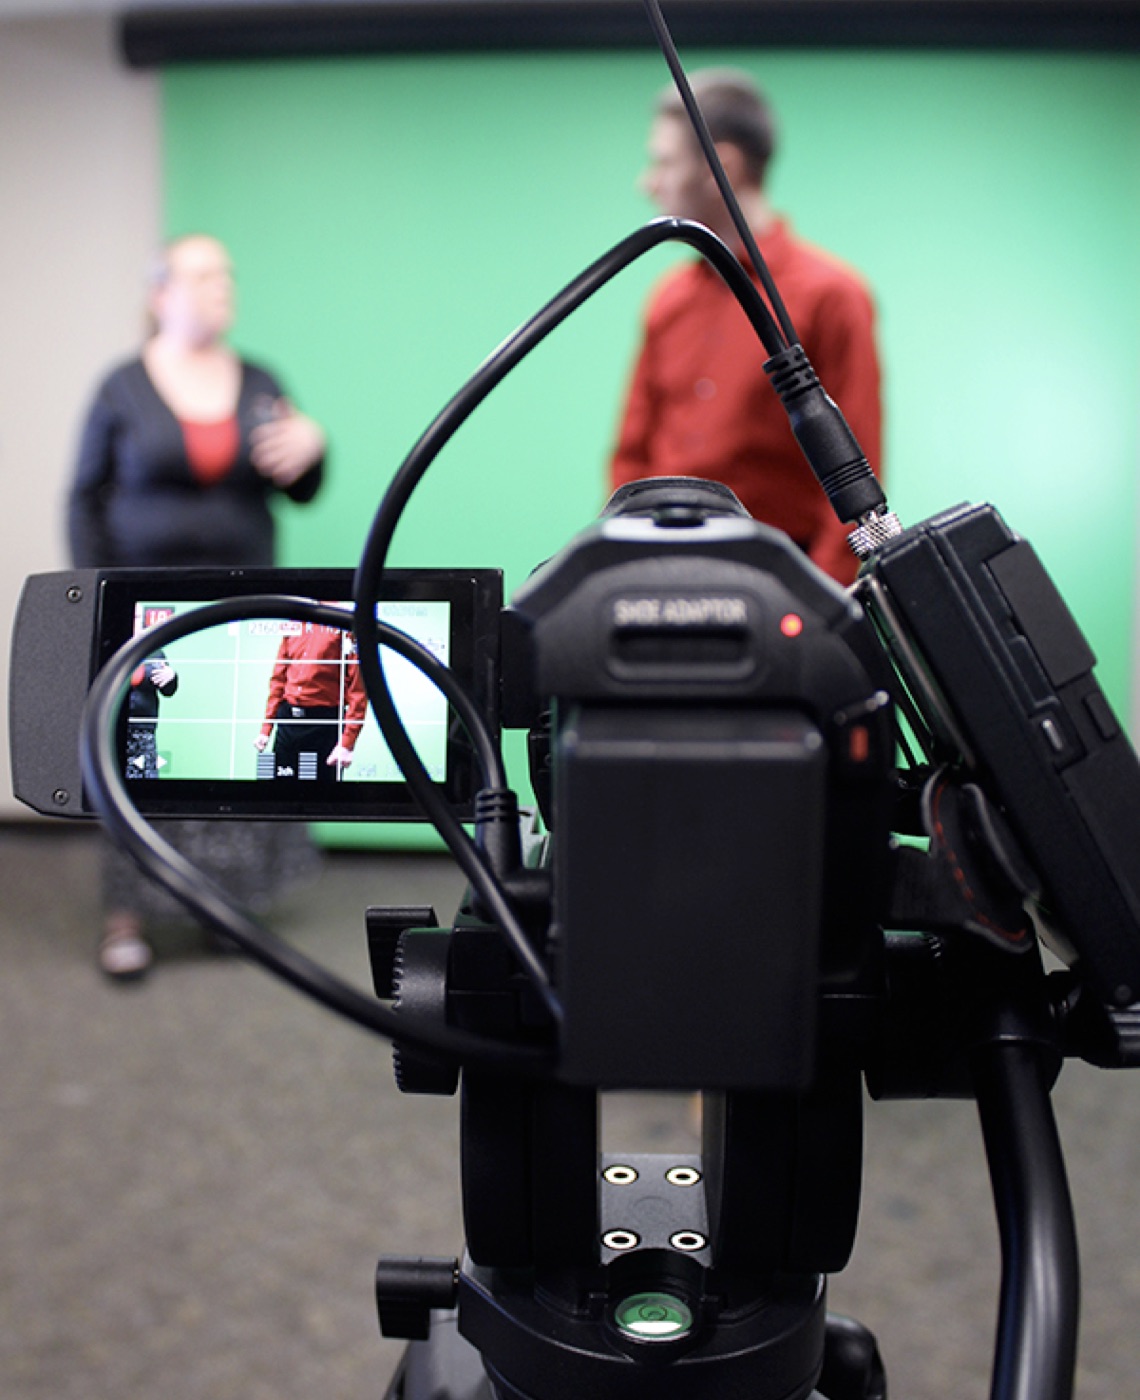 A man wearing a red shirt and a woman wearing a navy blue sweater stand in front of a green screen in the background of the photo while a black camera with a red light rests in the foreground.